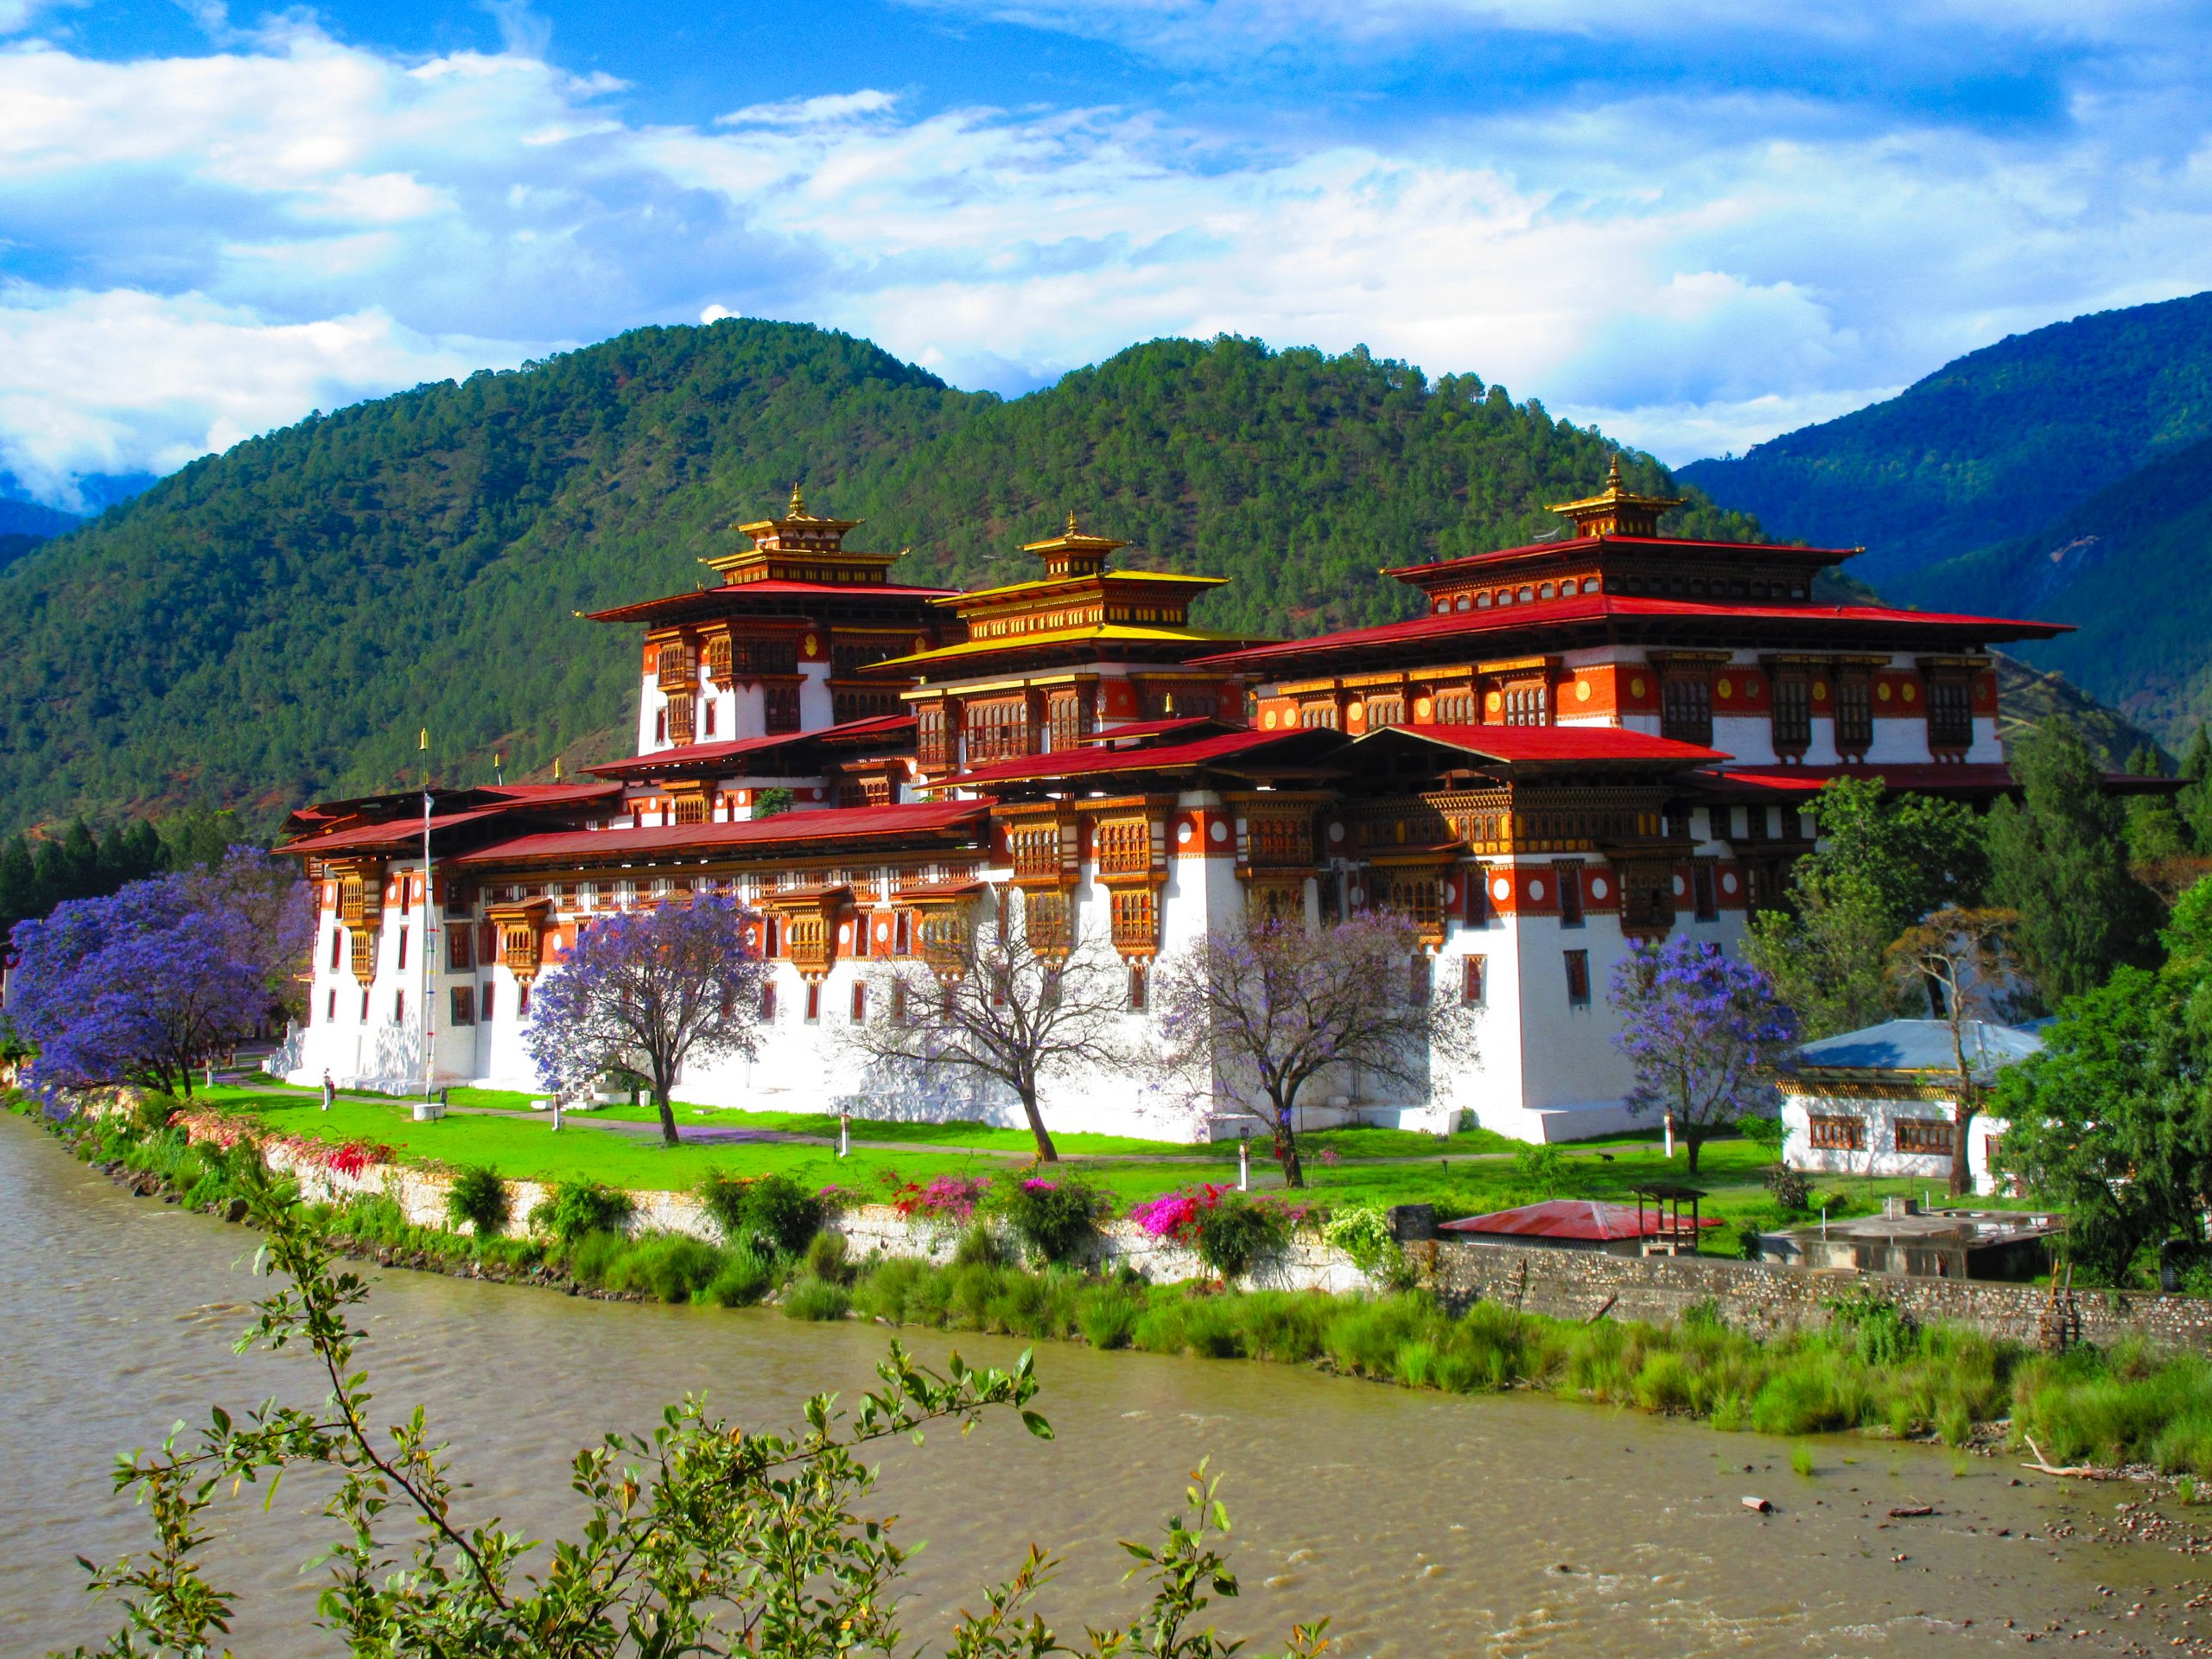 Palace of the King of Bhutan